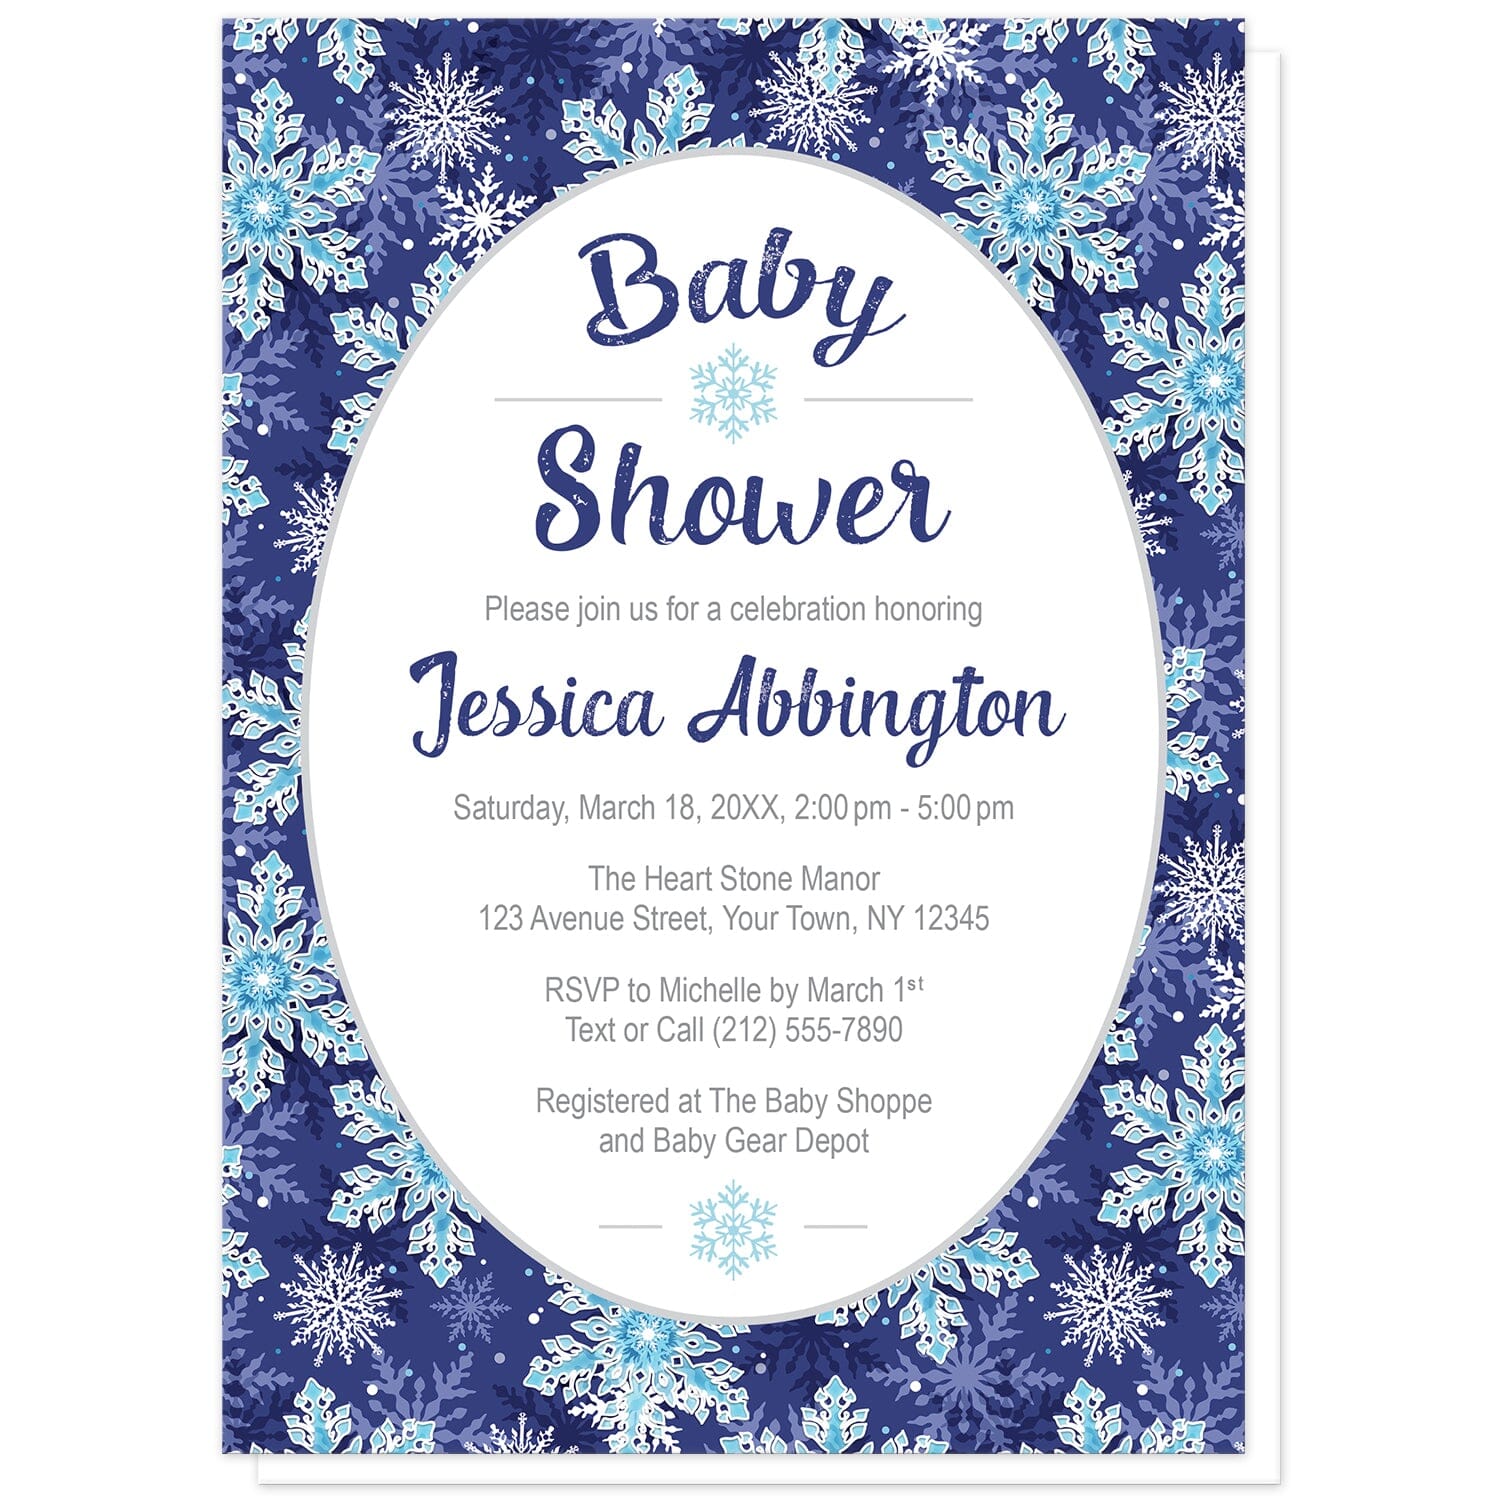 Navy Blue Snowflake Baby Shower Invitations at Artistically Invited. Beautifully ornate navy blue snowflake baby shower invitations with your personalized baby shower celebration details custom printed in blue and gray in a white oval frame design over a pretty navy blue, aqua blue, and white snowflake pattern background.